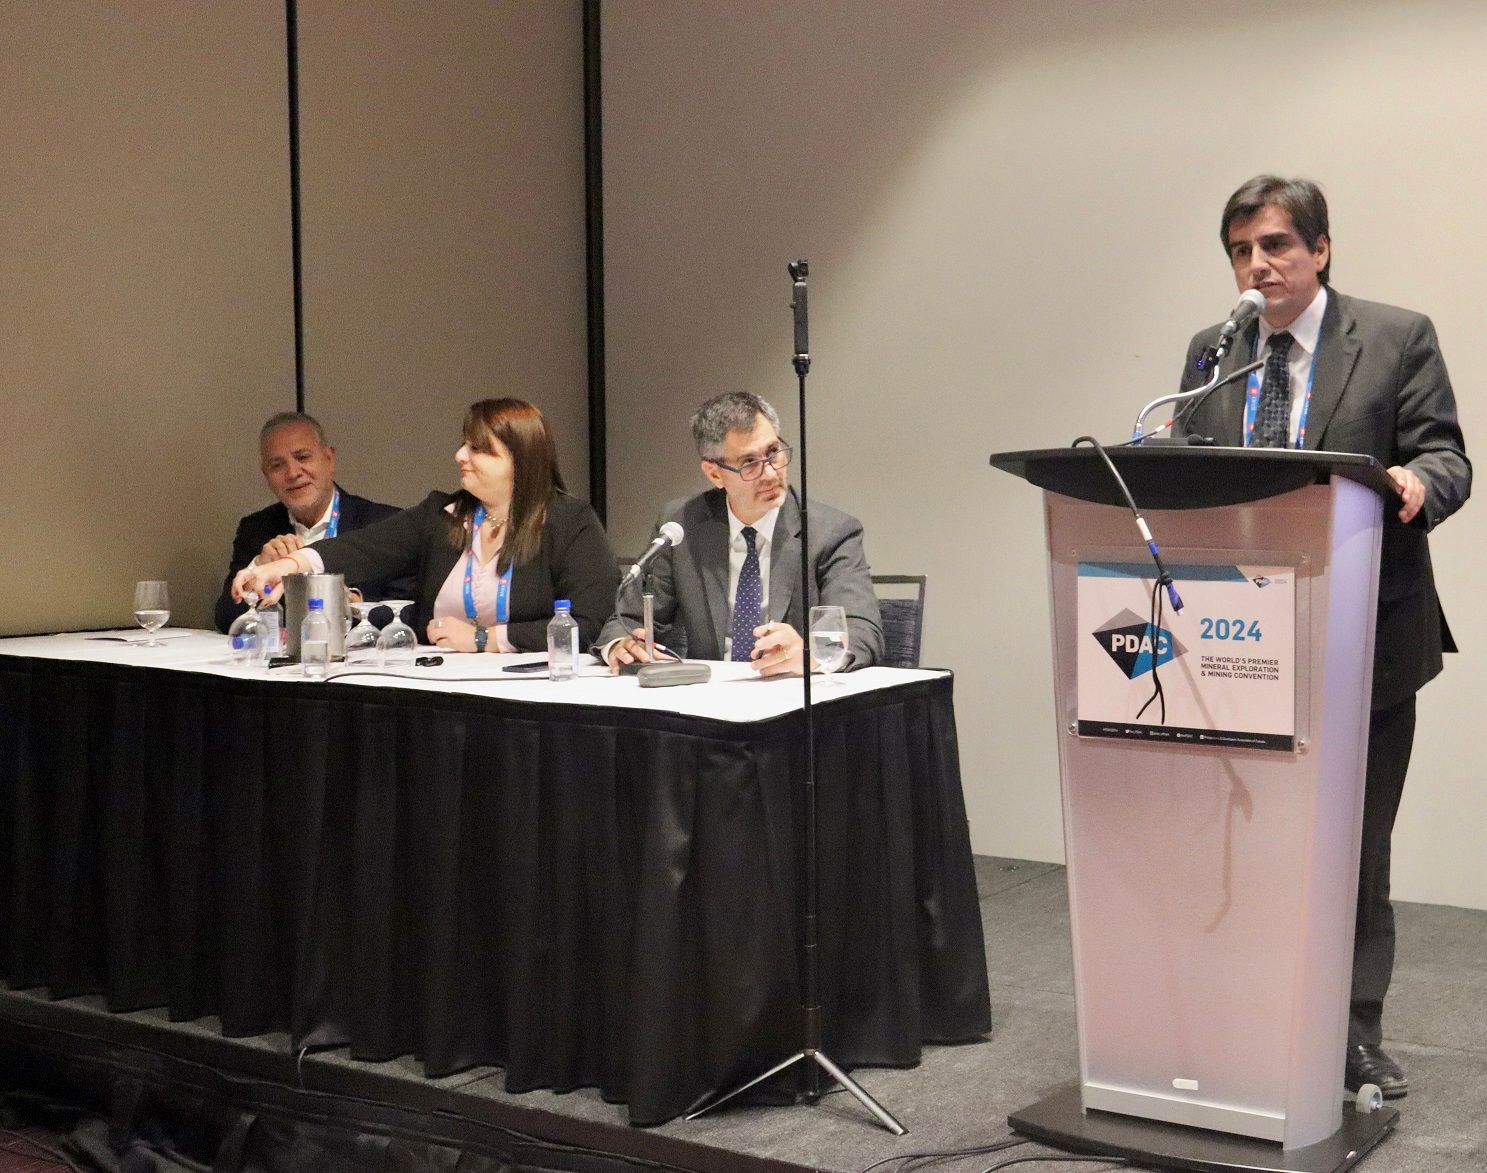 Catamarca delegation, focused on lithium investments, embarked on PDAC 2024